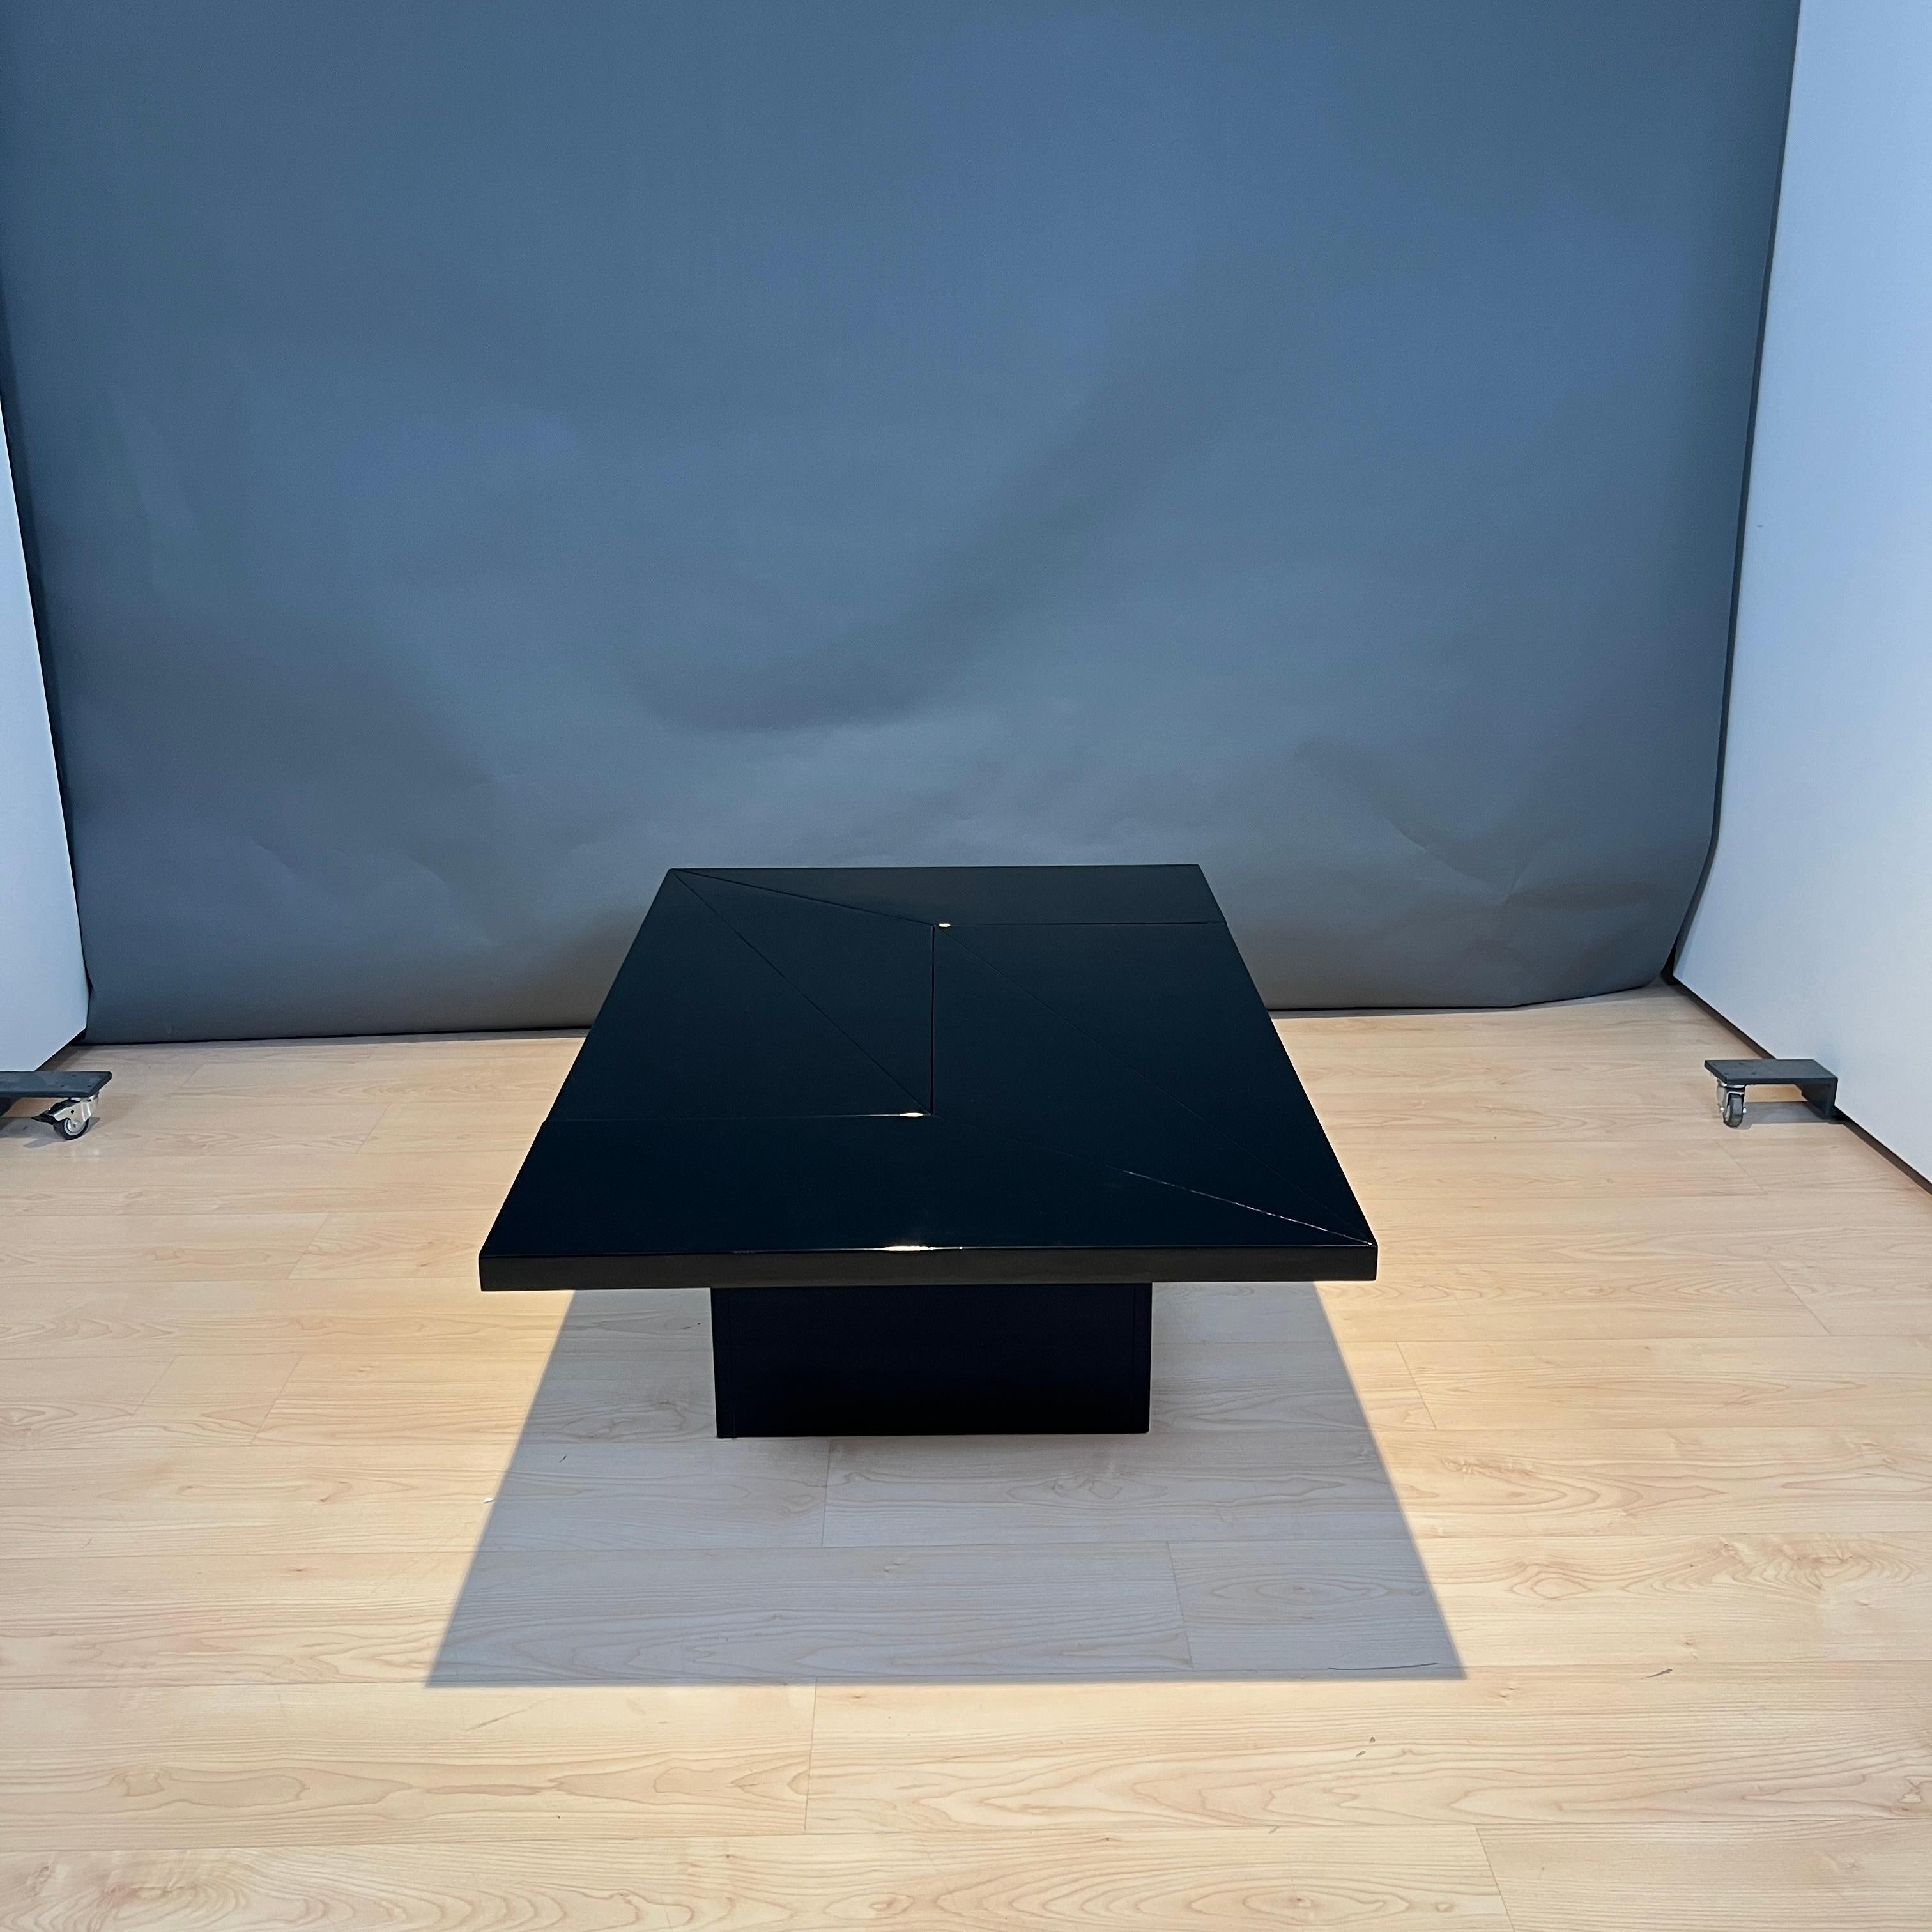 Polished Convertible Coffee Table by Roche Bobois, Black Lacquer, France, 1970s For Sale